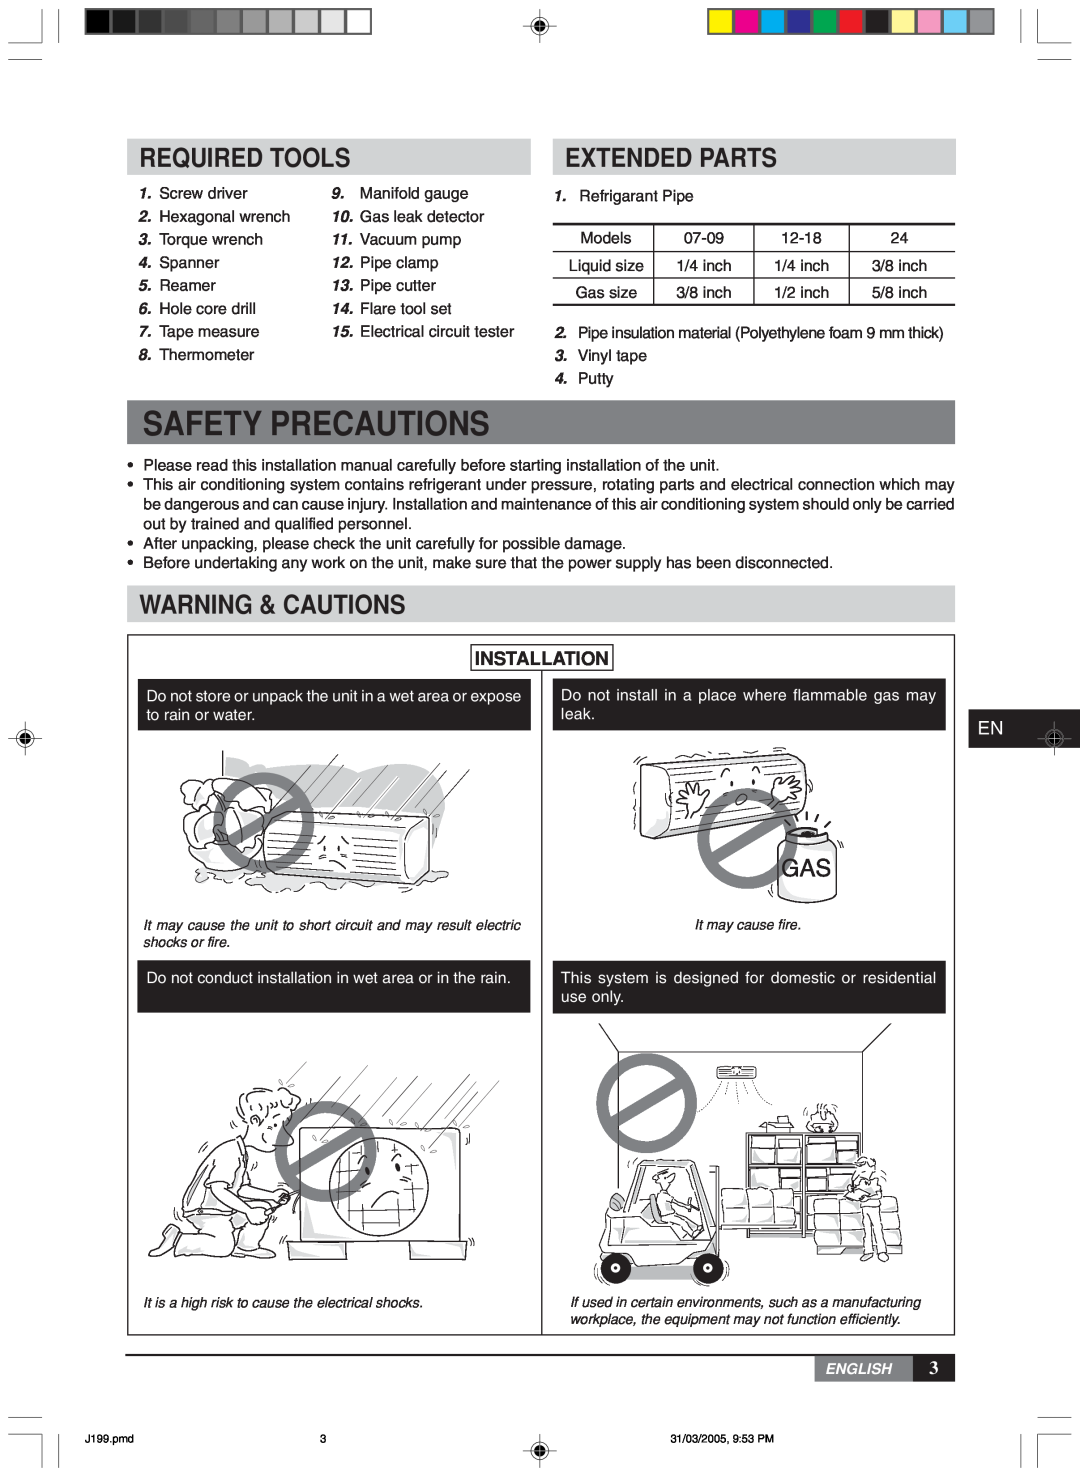 York MLCA-MLHA-07-24 Safety Precautions, Required Tools, Extended Parts, Warning & Cautions, Installation, leak, English 